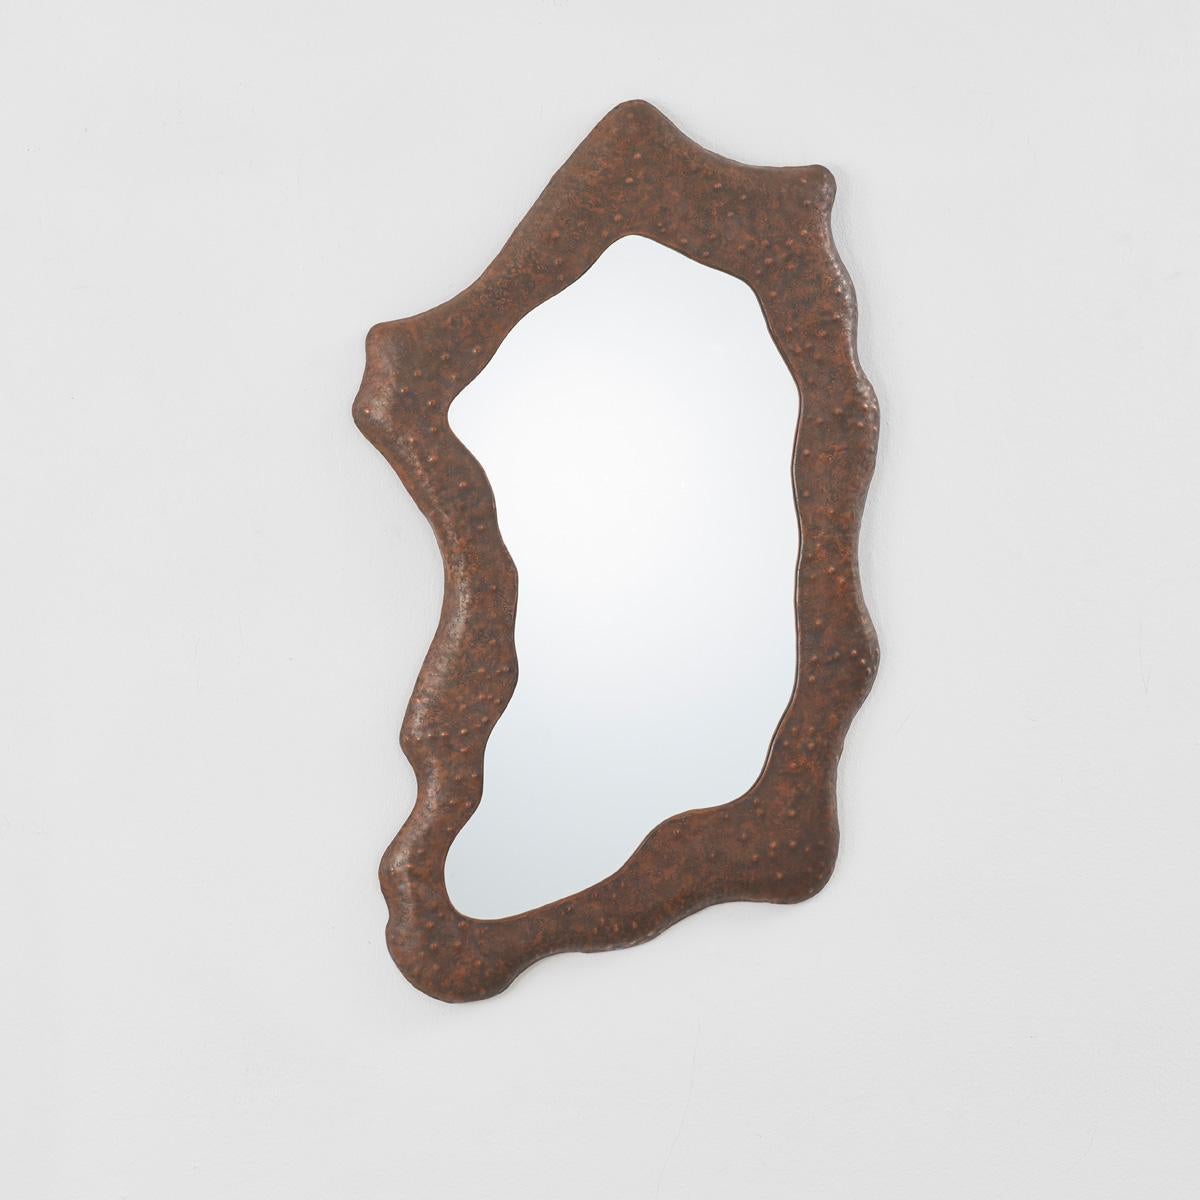 Italian artist and designer Angelo Bragalini, most recognised for his talents as a sculptor, was a technically skilled and acclaimed goldsmith operating independently from his workshop in Bologna, Italy.

This abstract Bragalini mirror has an